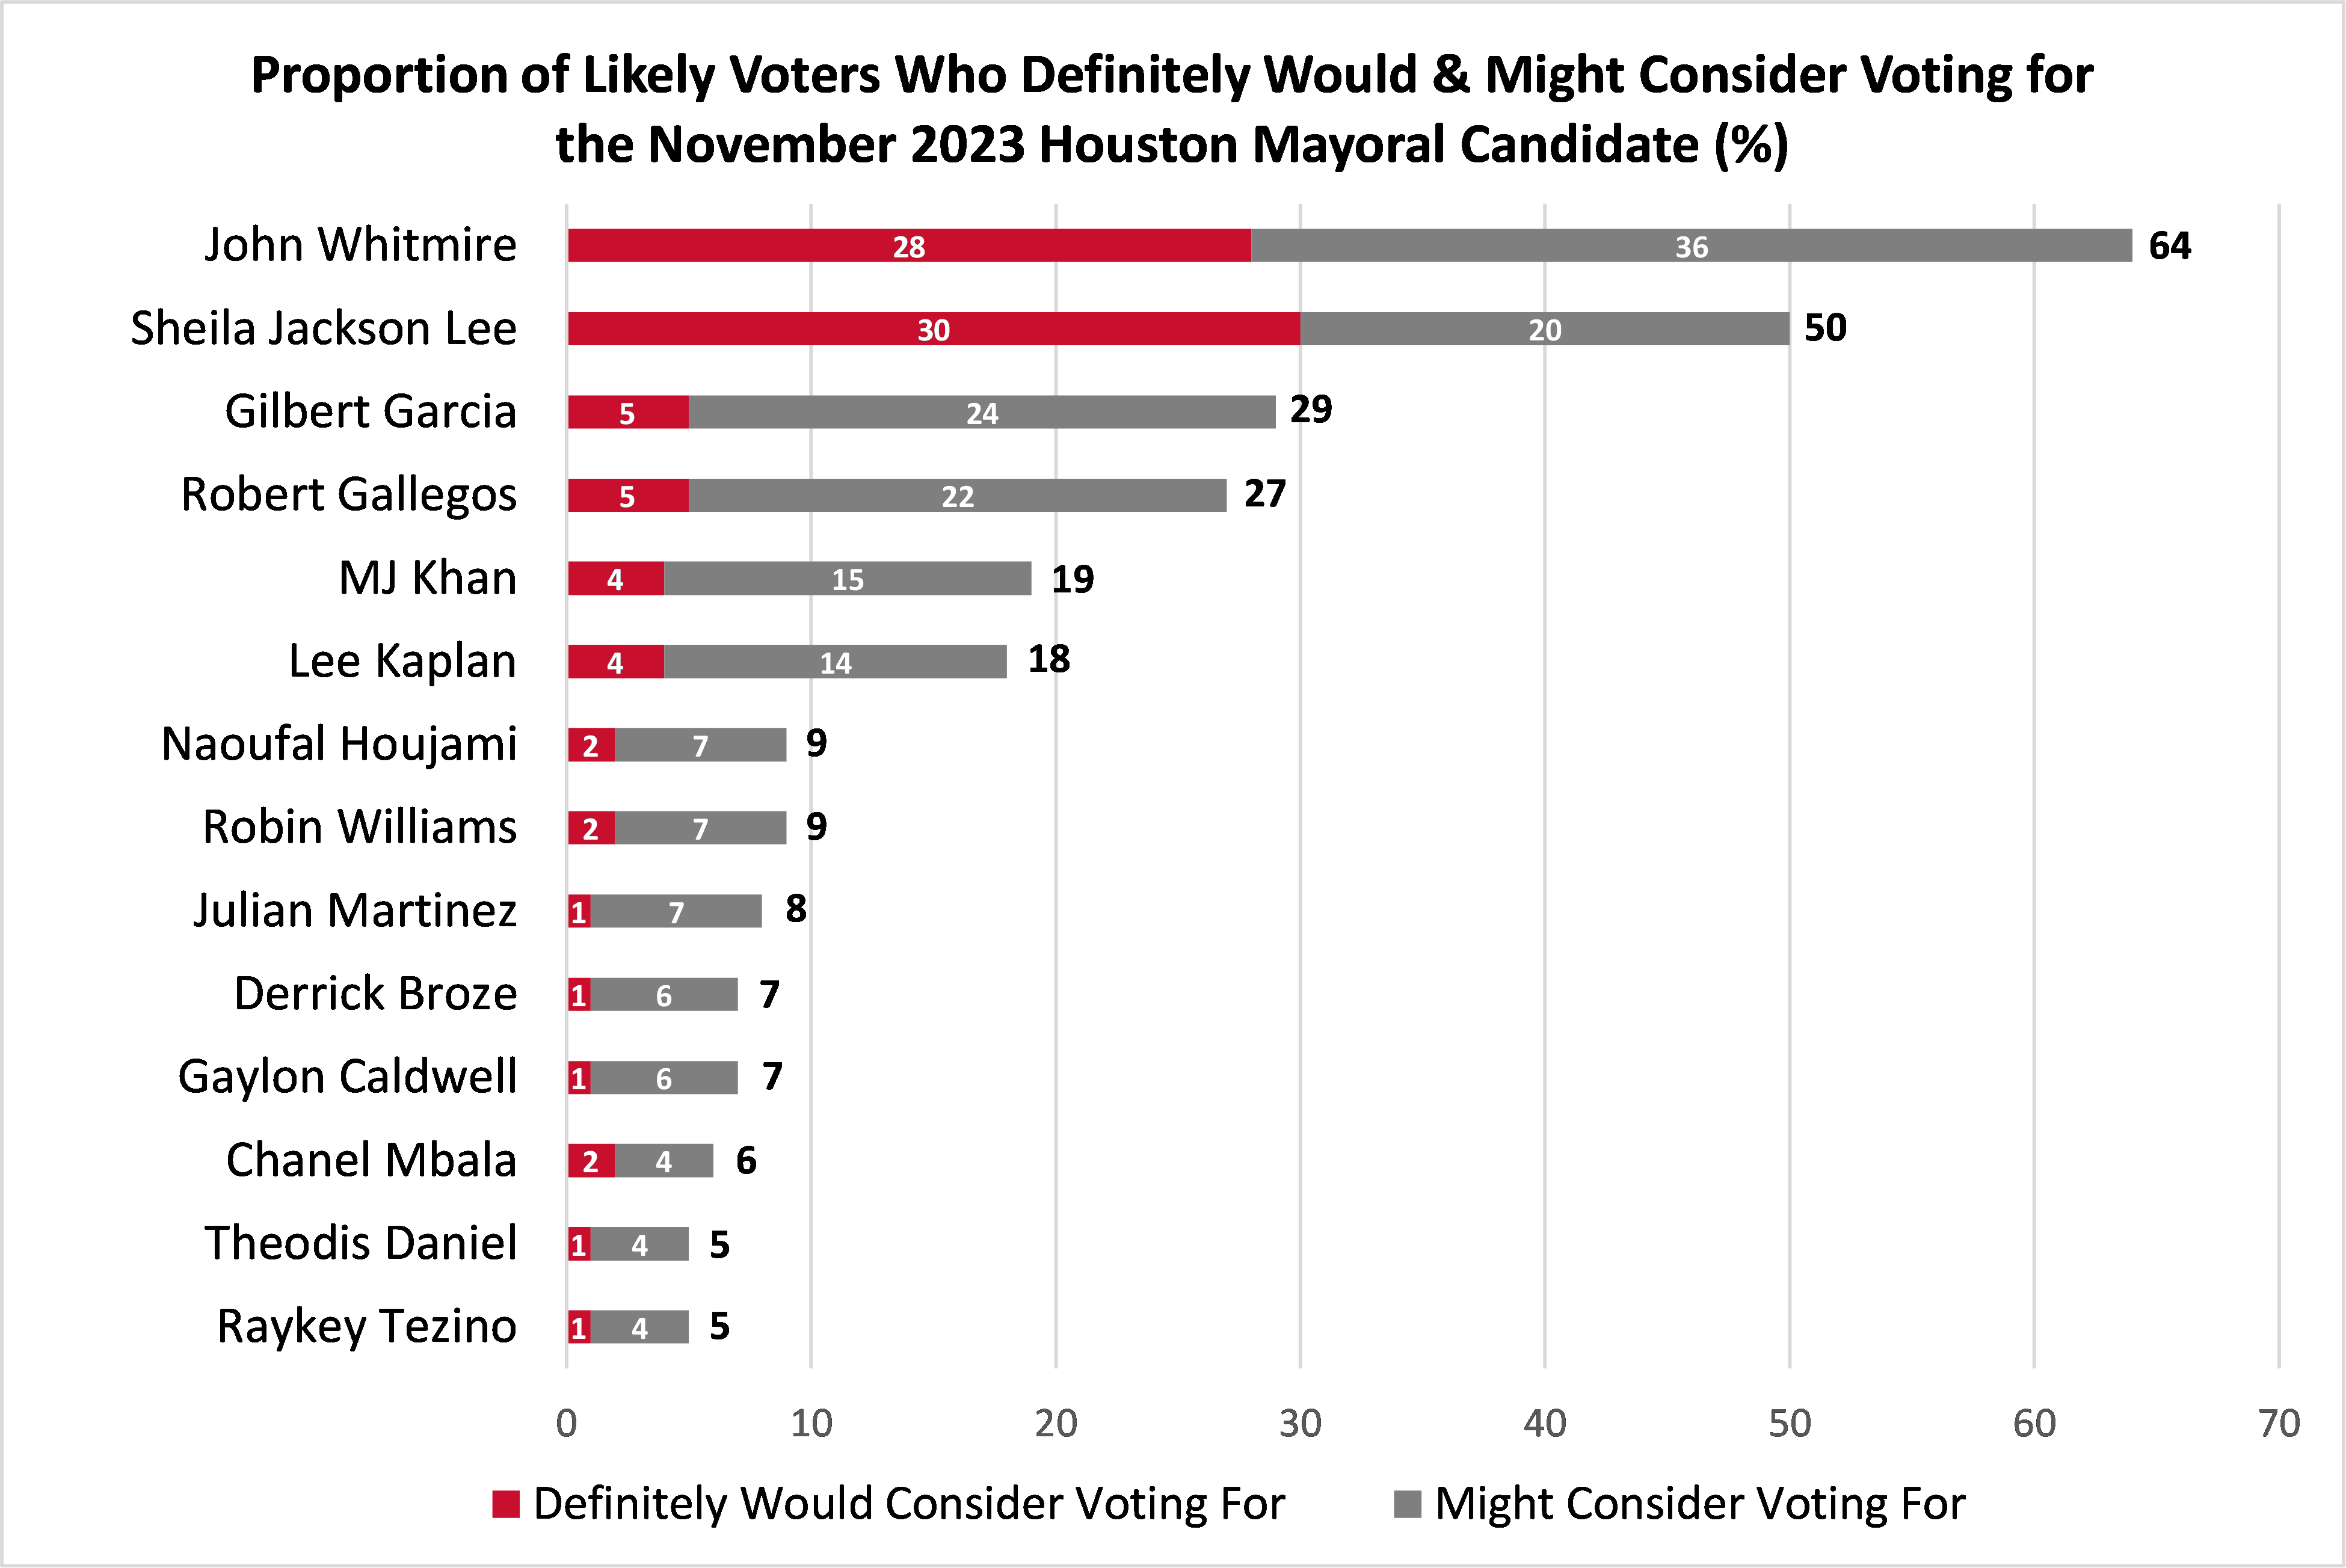 bar graph of likely voters who would and might consider voting in the Houston Mayoral Election